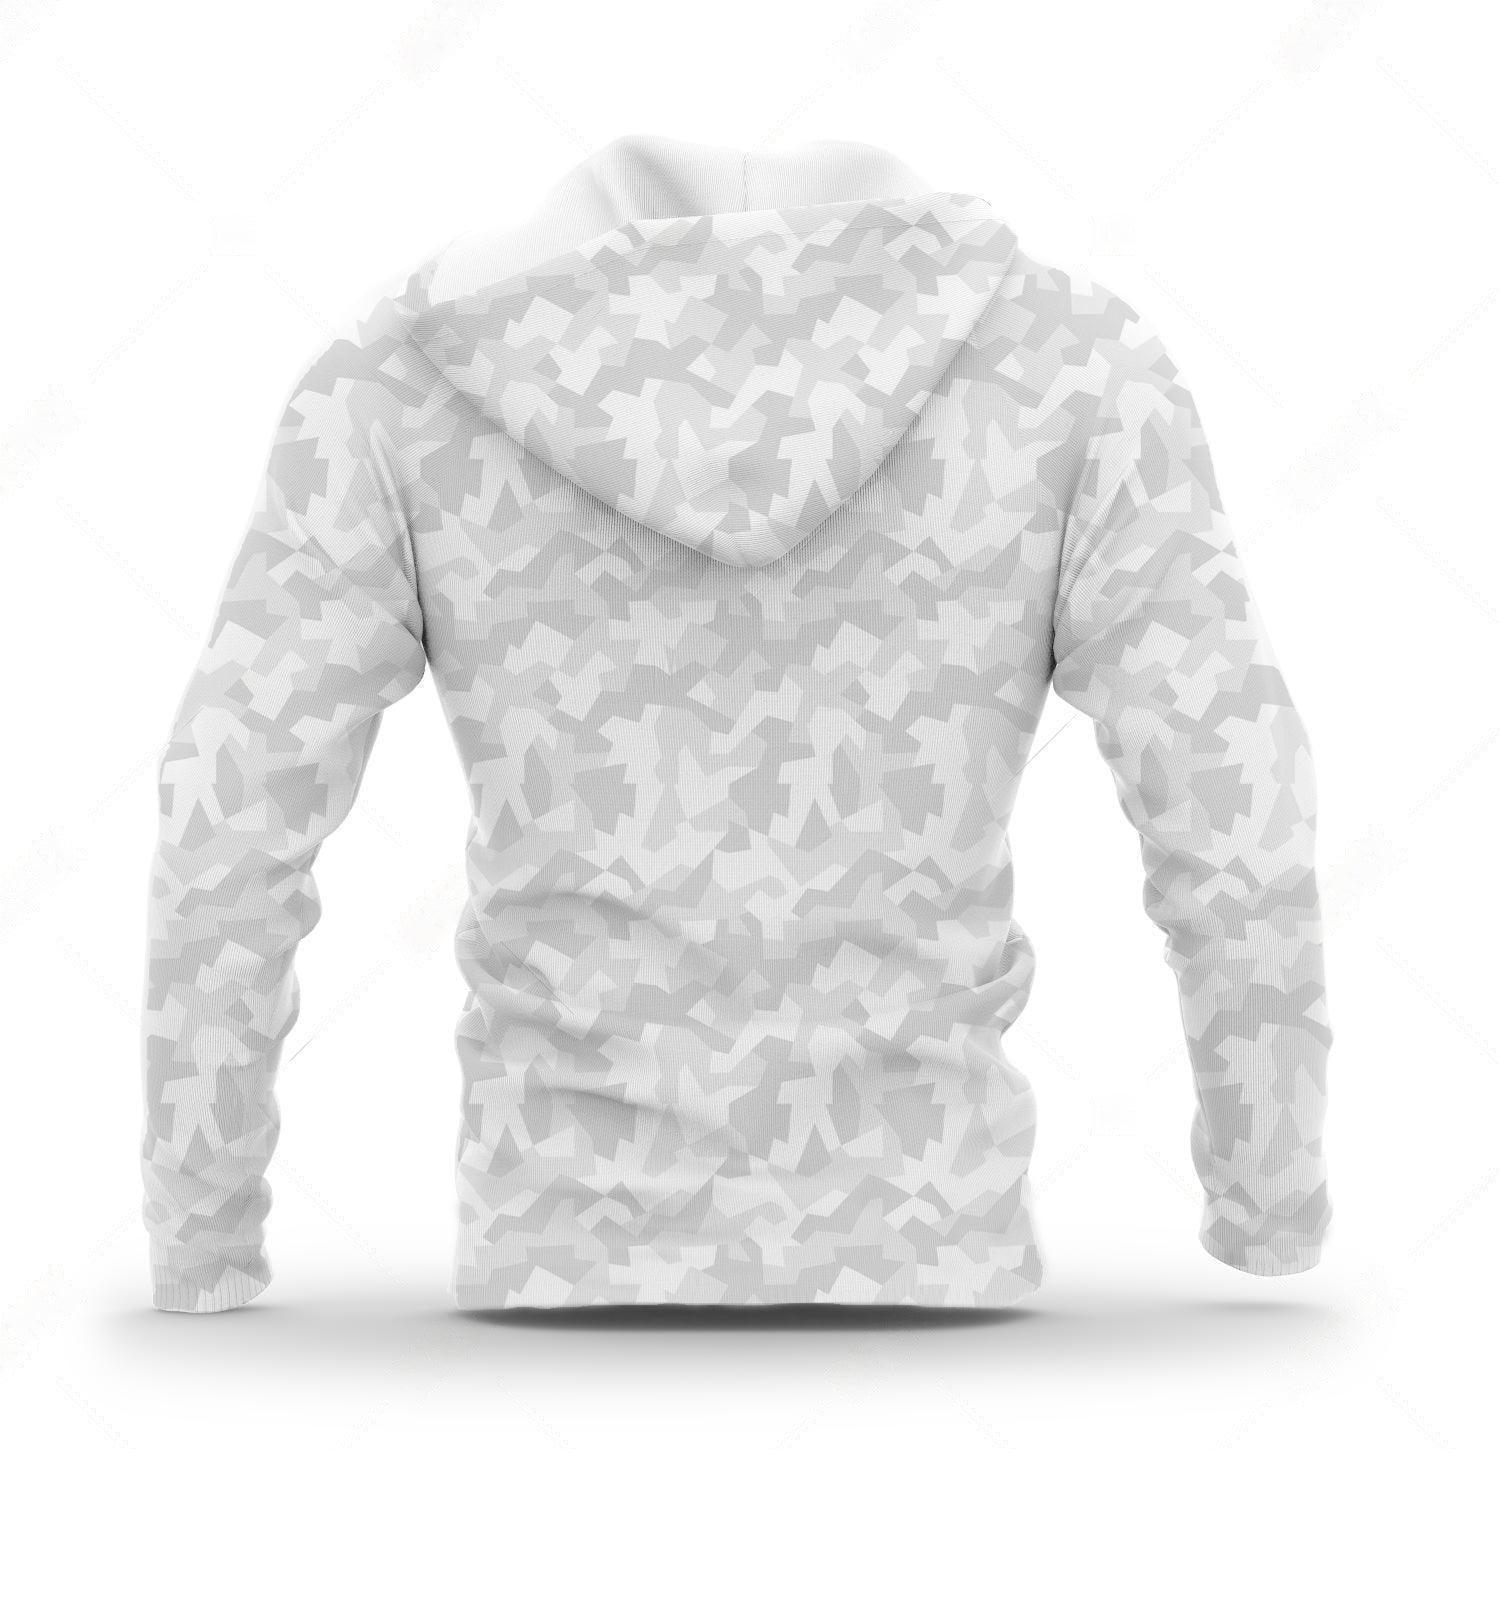 Arctic Frost White GymX Hoodie - GymX